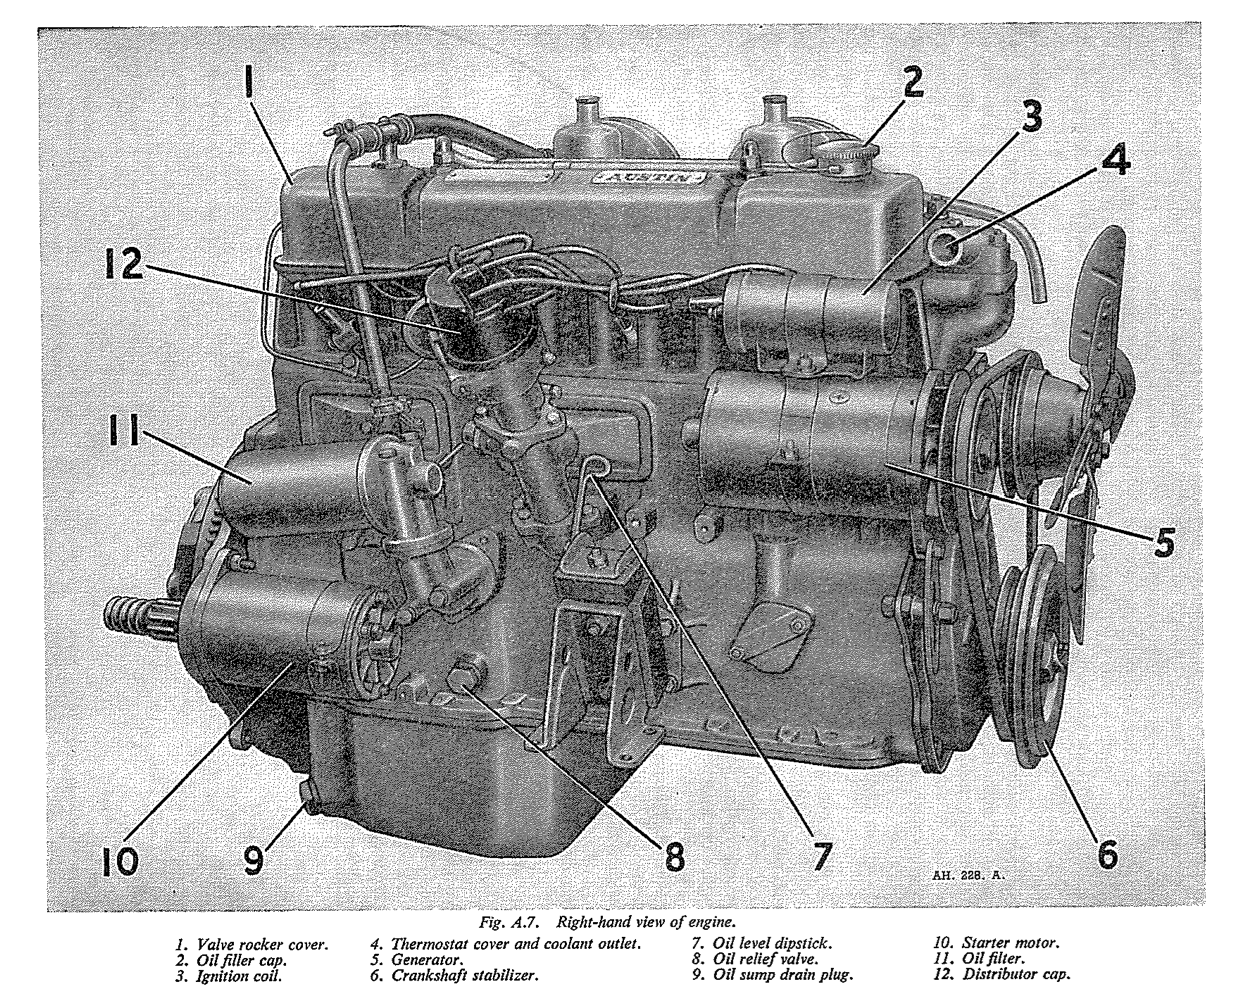 Fig A.7. Right-hand view of the engine